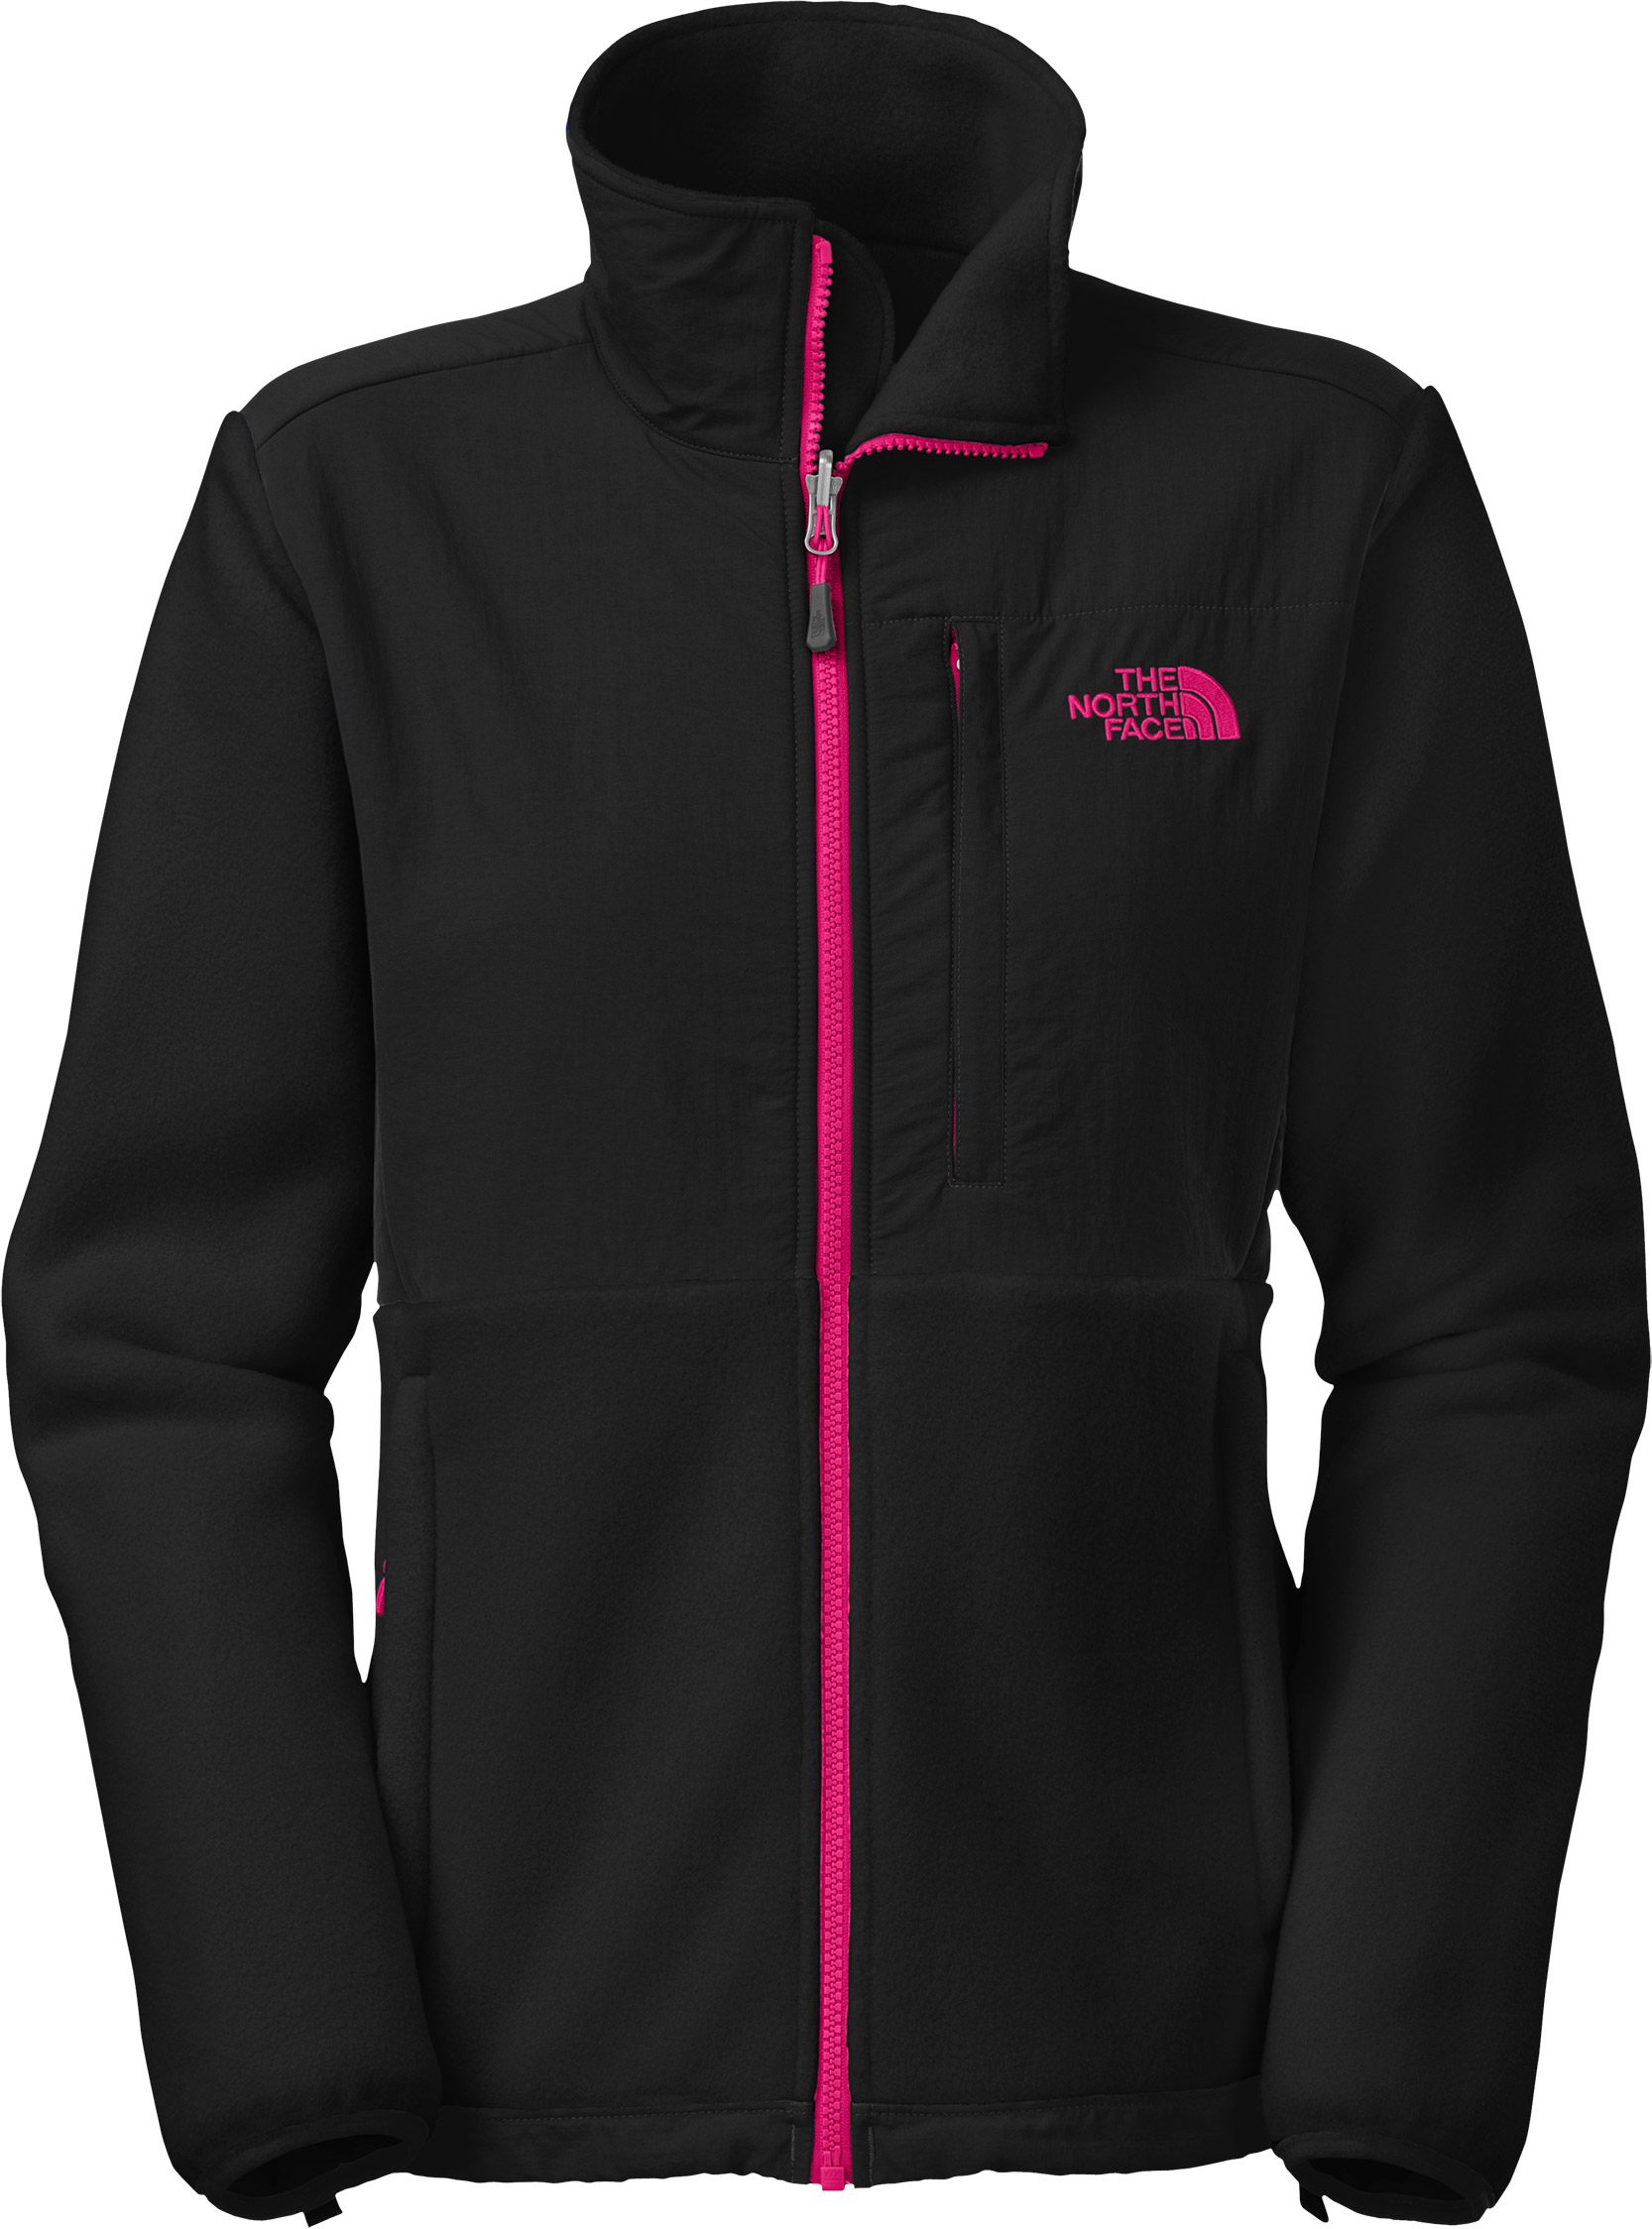 The North Face Denali Jacket - Womens | Mount Everest